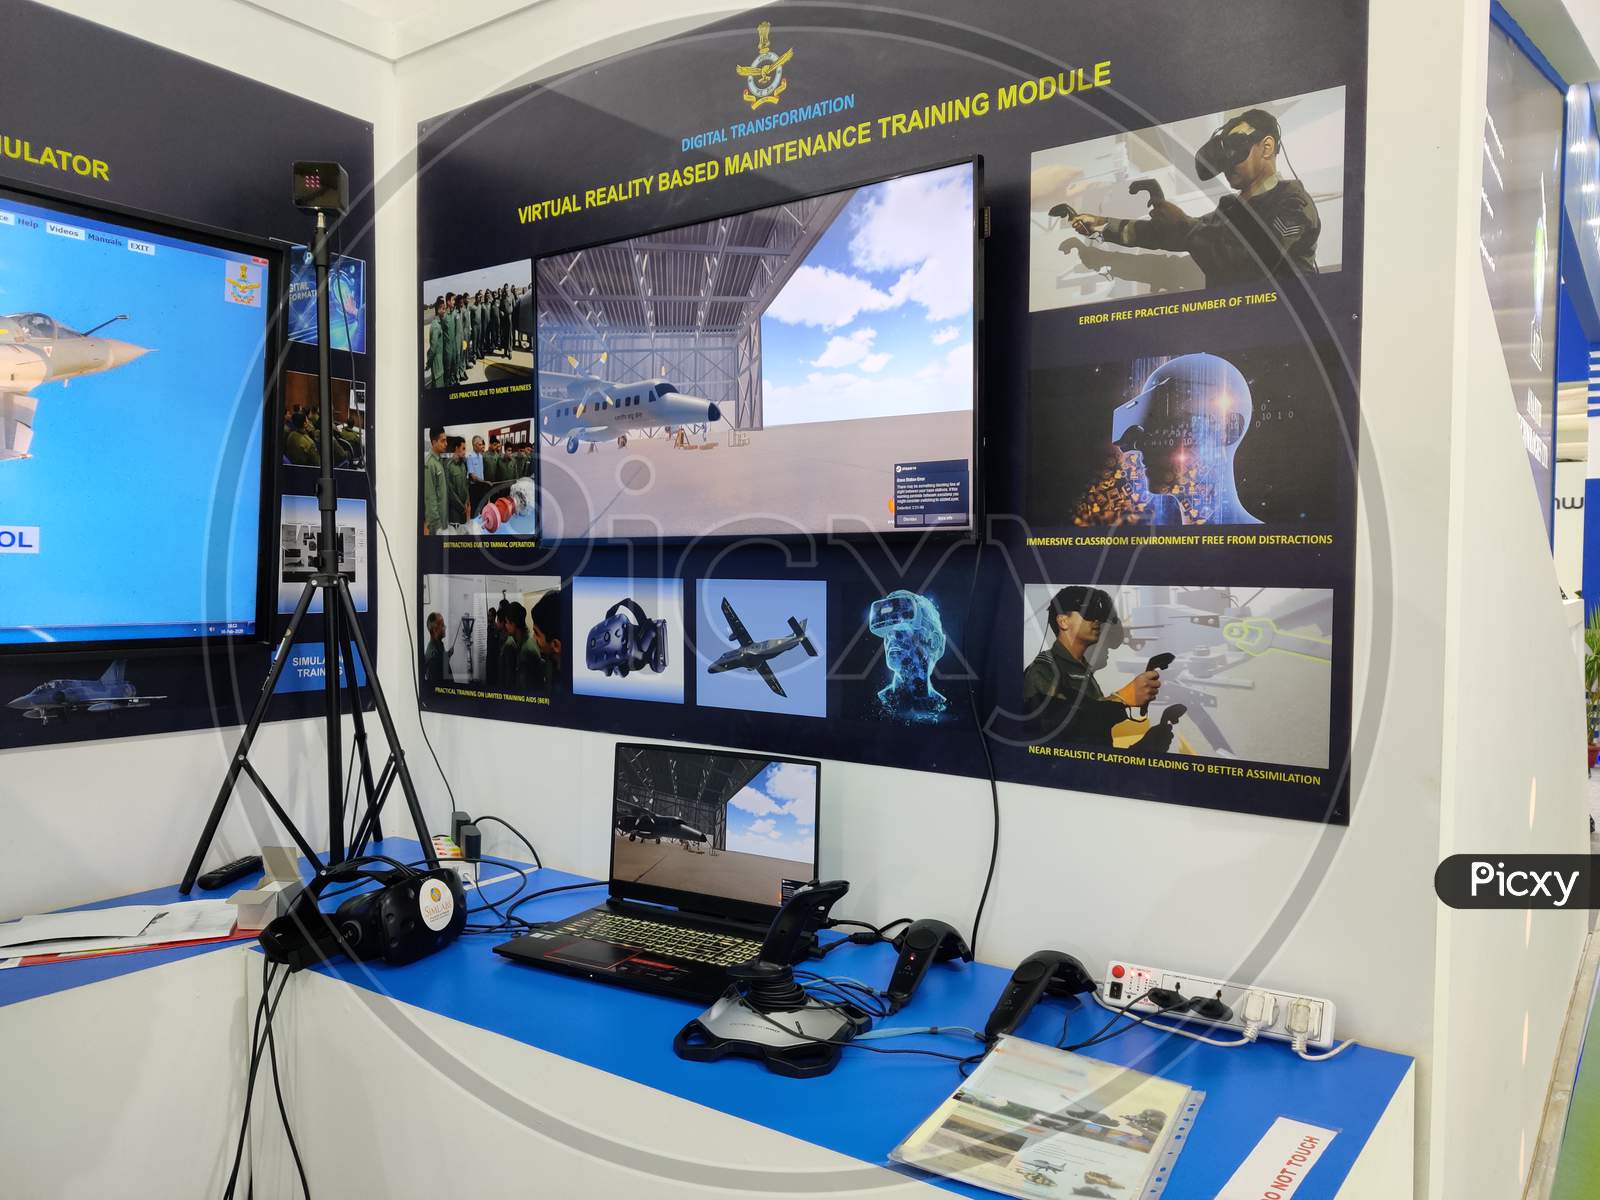 Indian Airforce - Defence Expo 2020